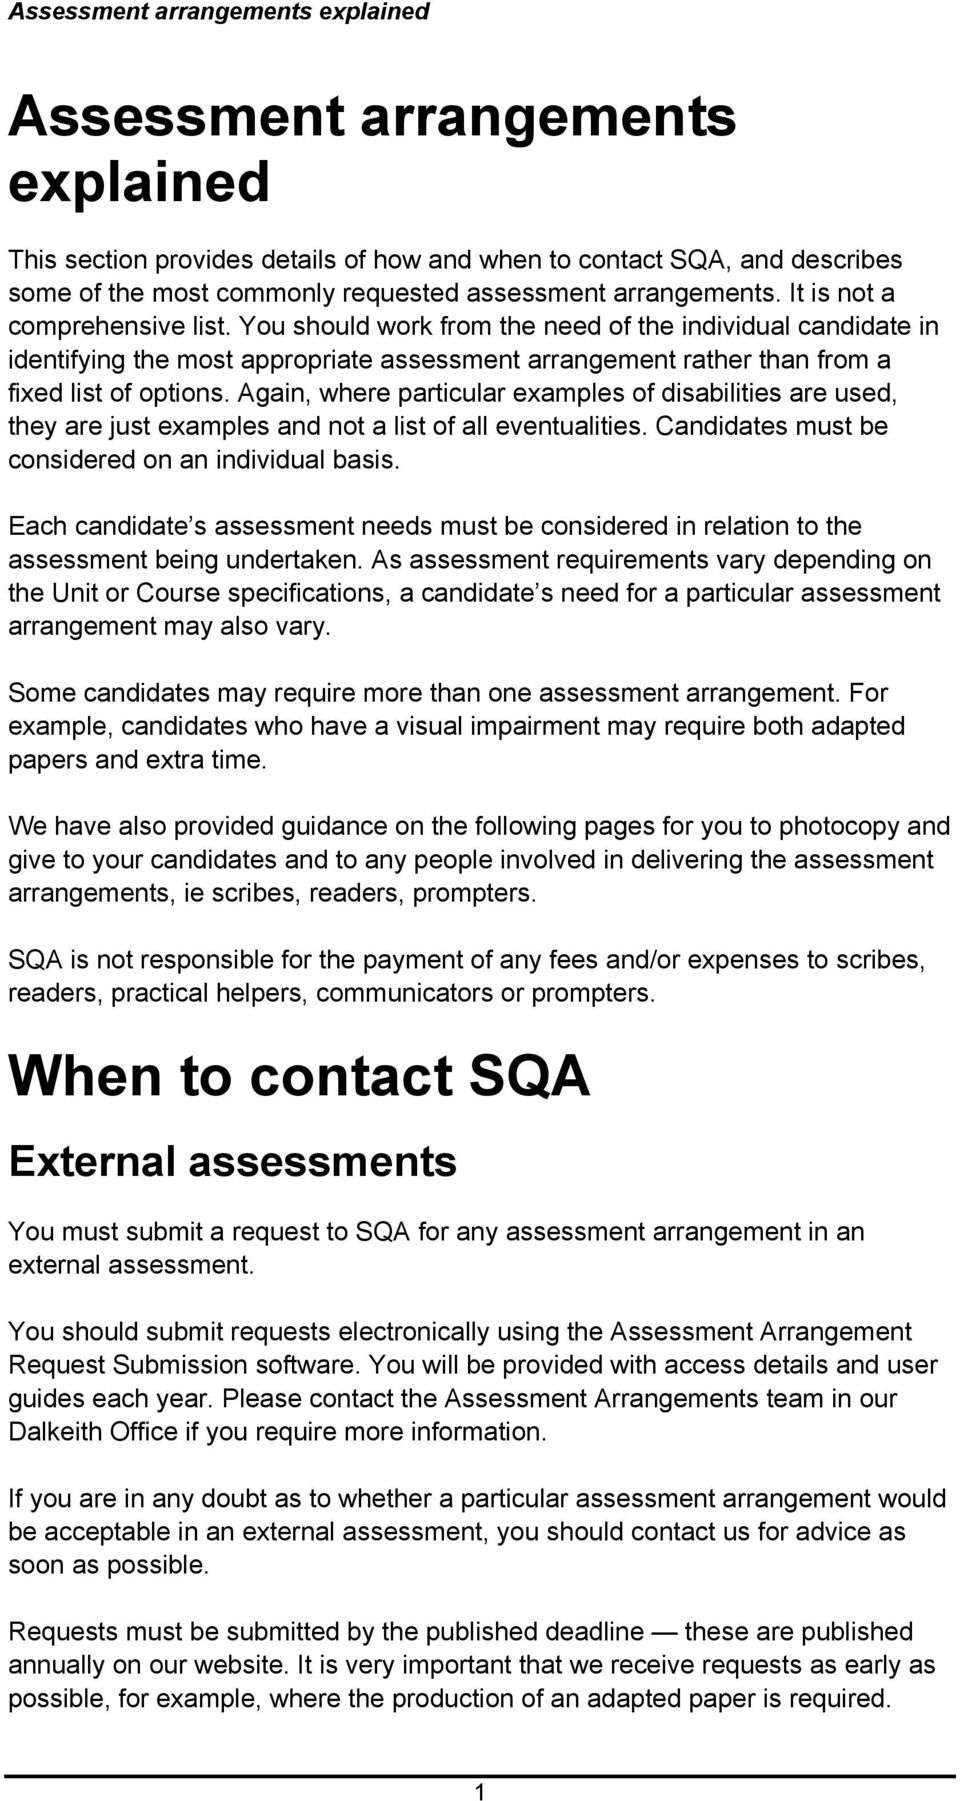 You should work from the need of the individual candidate in identifying the most appropriate assessment arrangement rather than from a fixed list of options.